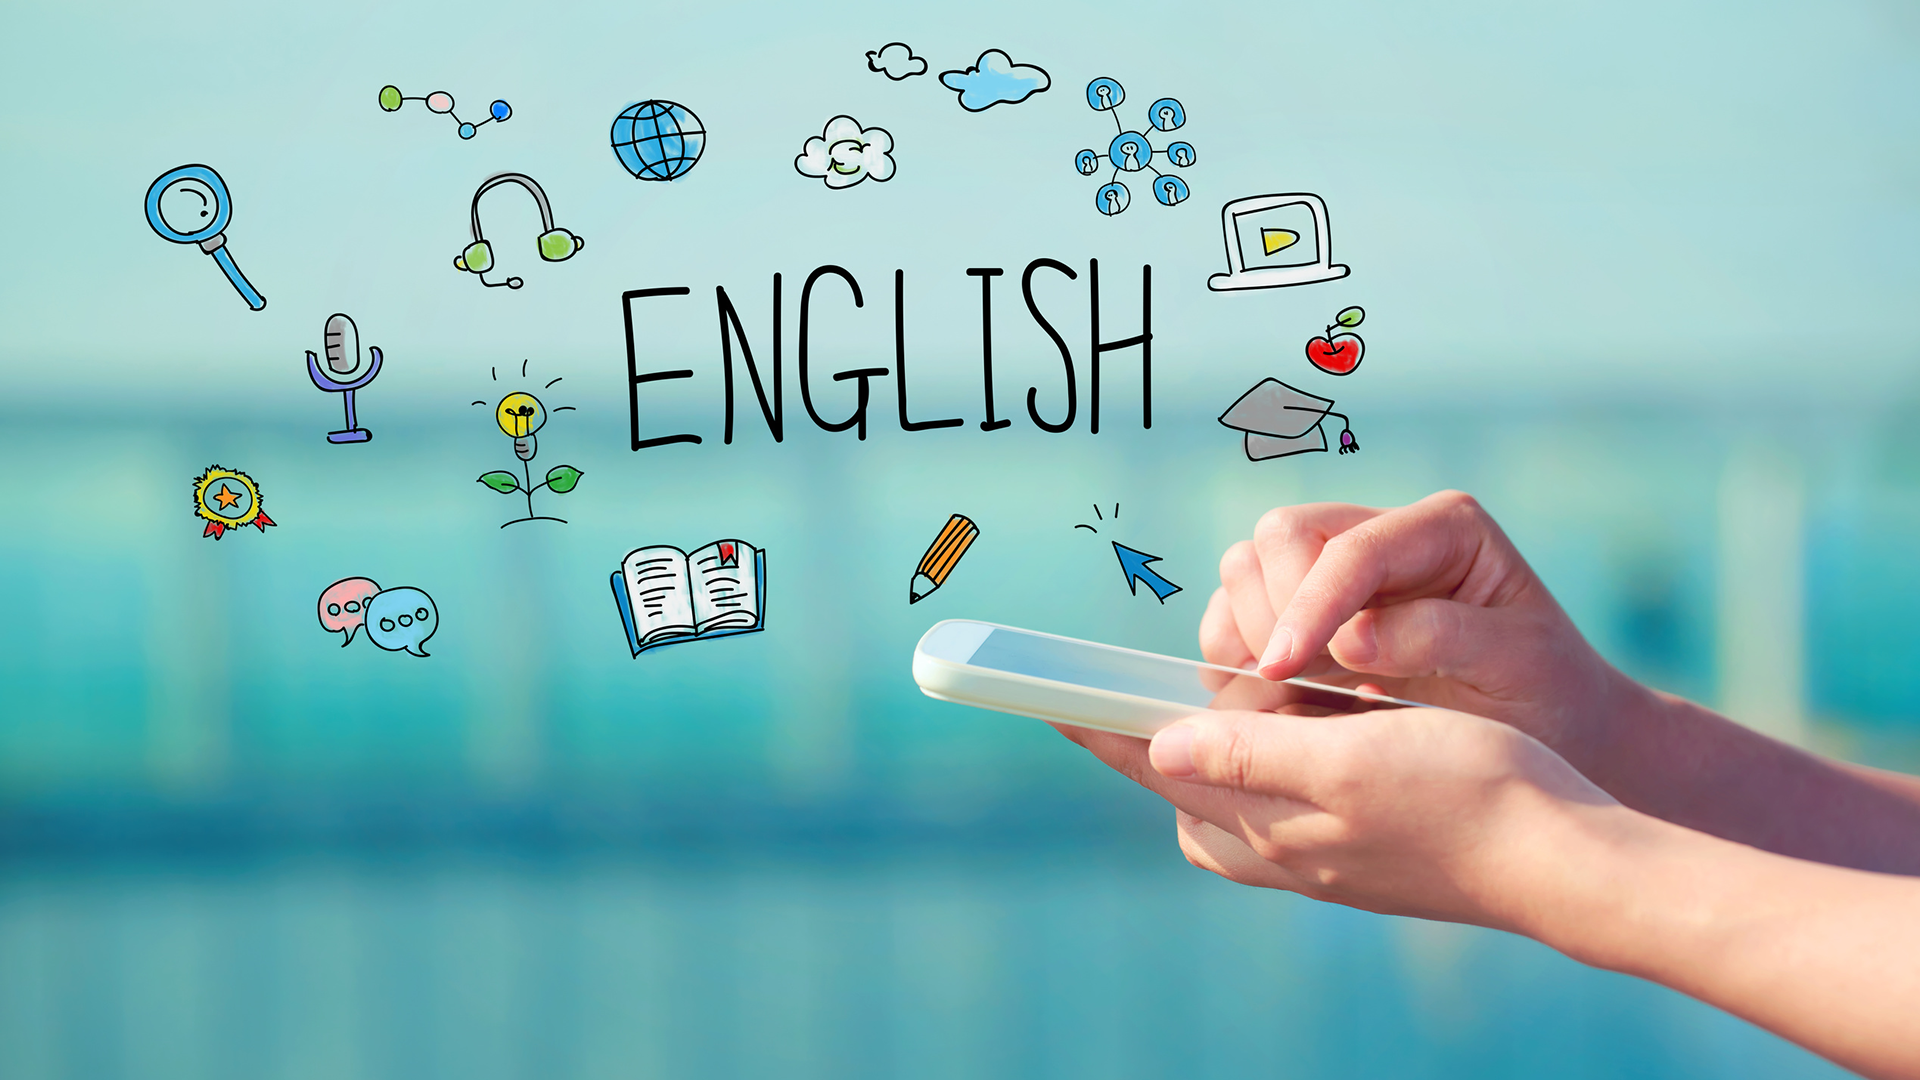 Learn English Online - Different Methods